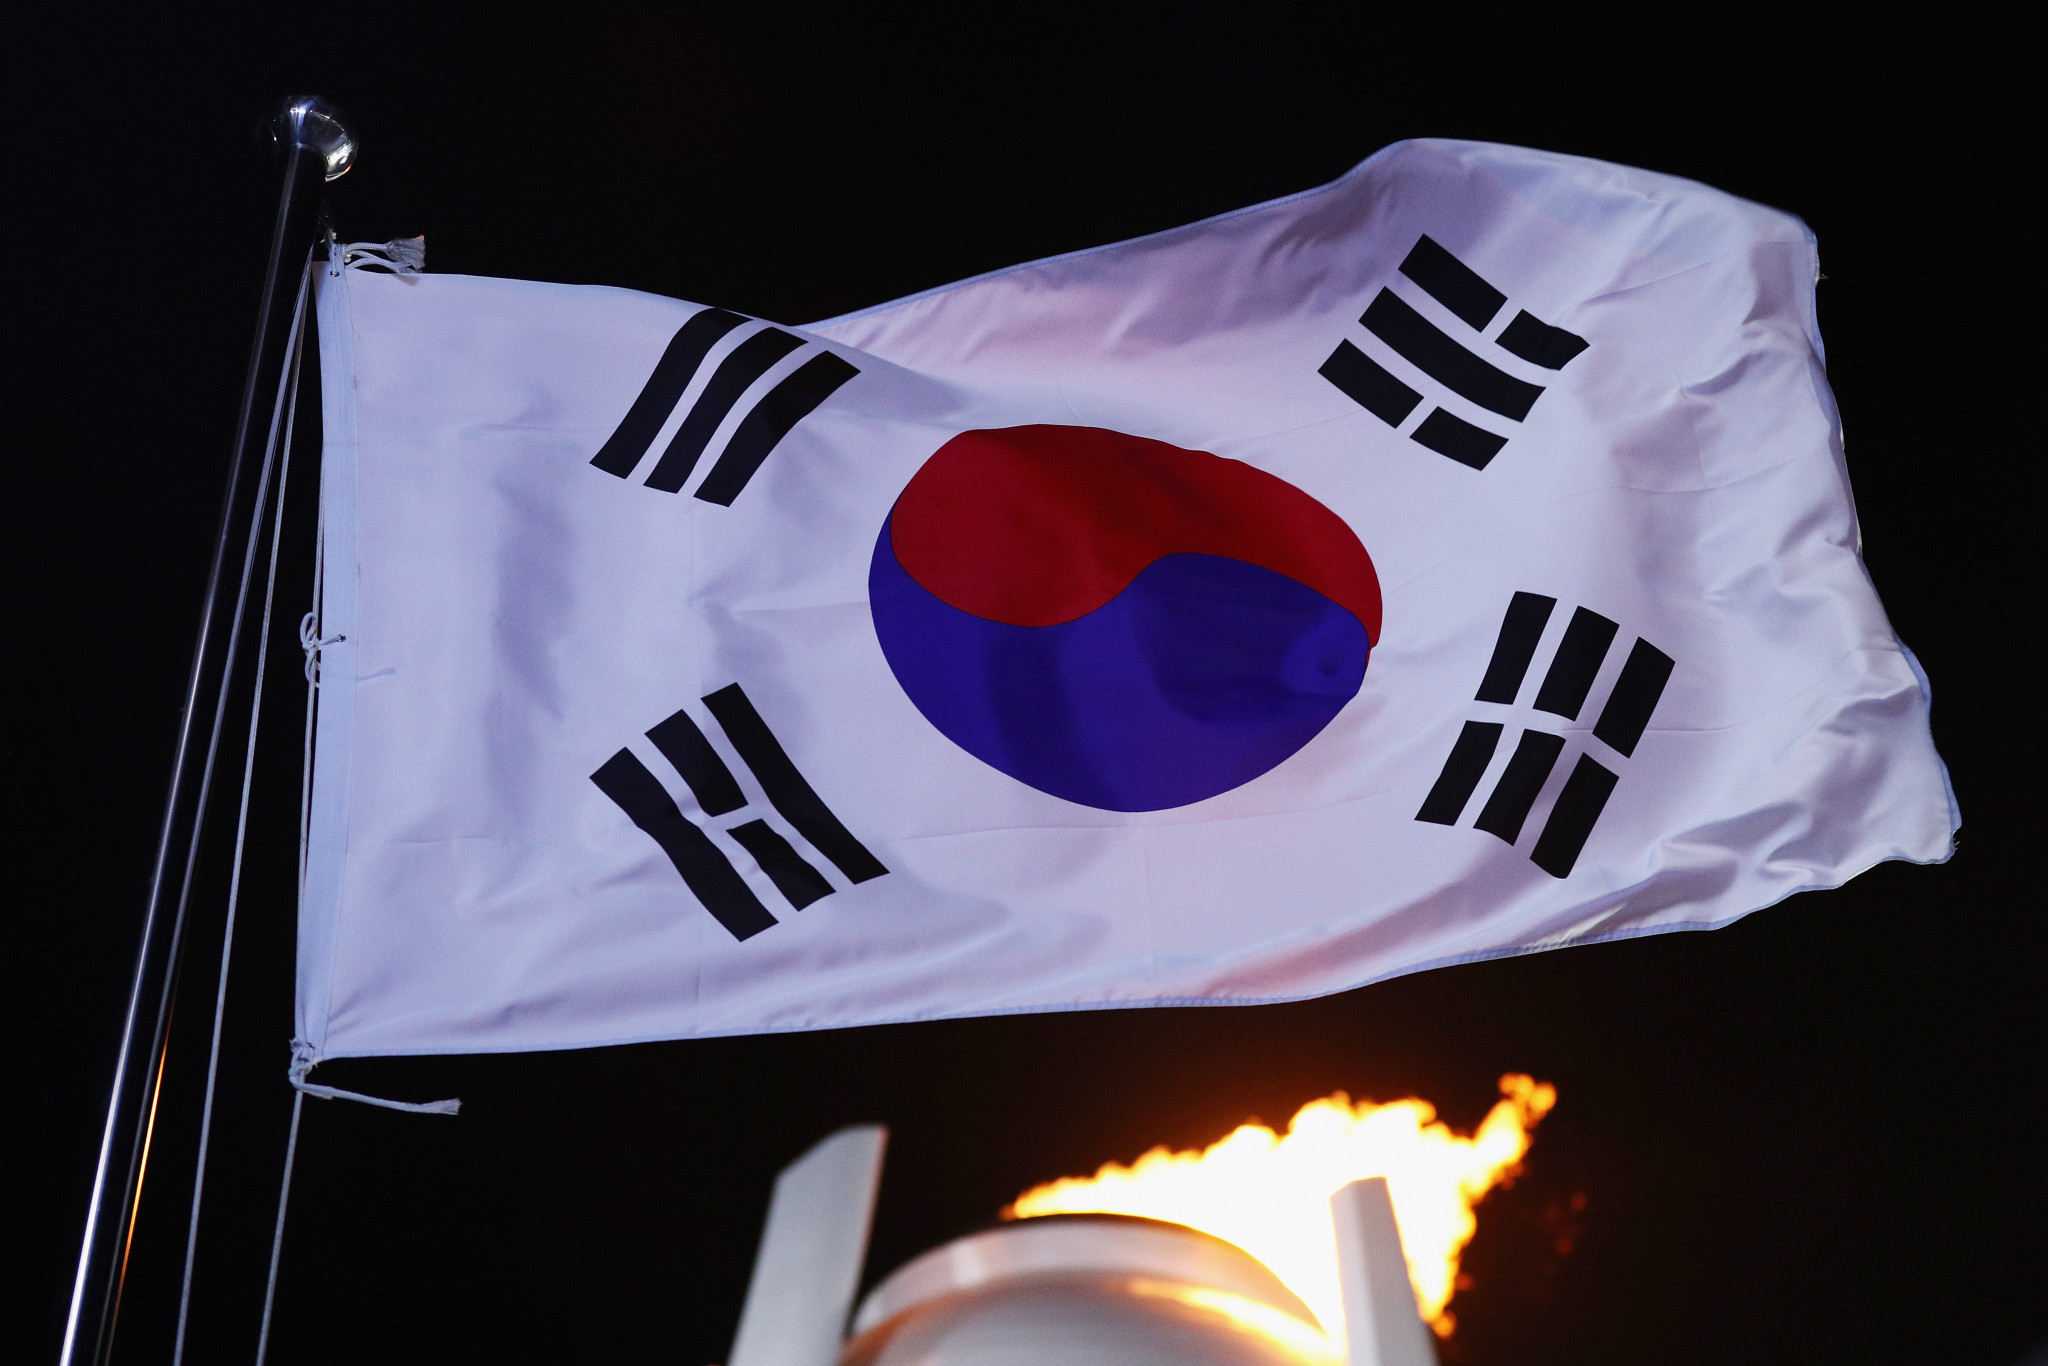 The South Korean Ministry of Economy and Finance has permitted for Chungcheong Megacity to stage the 2027 Summer World University Games, if the country's bid is successful ©Getty Images